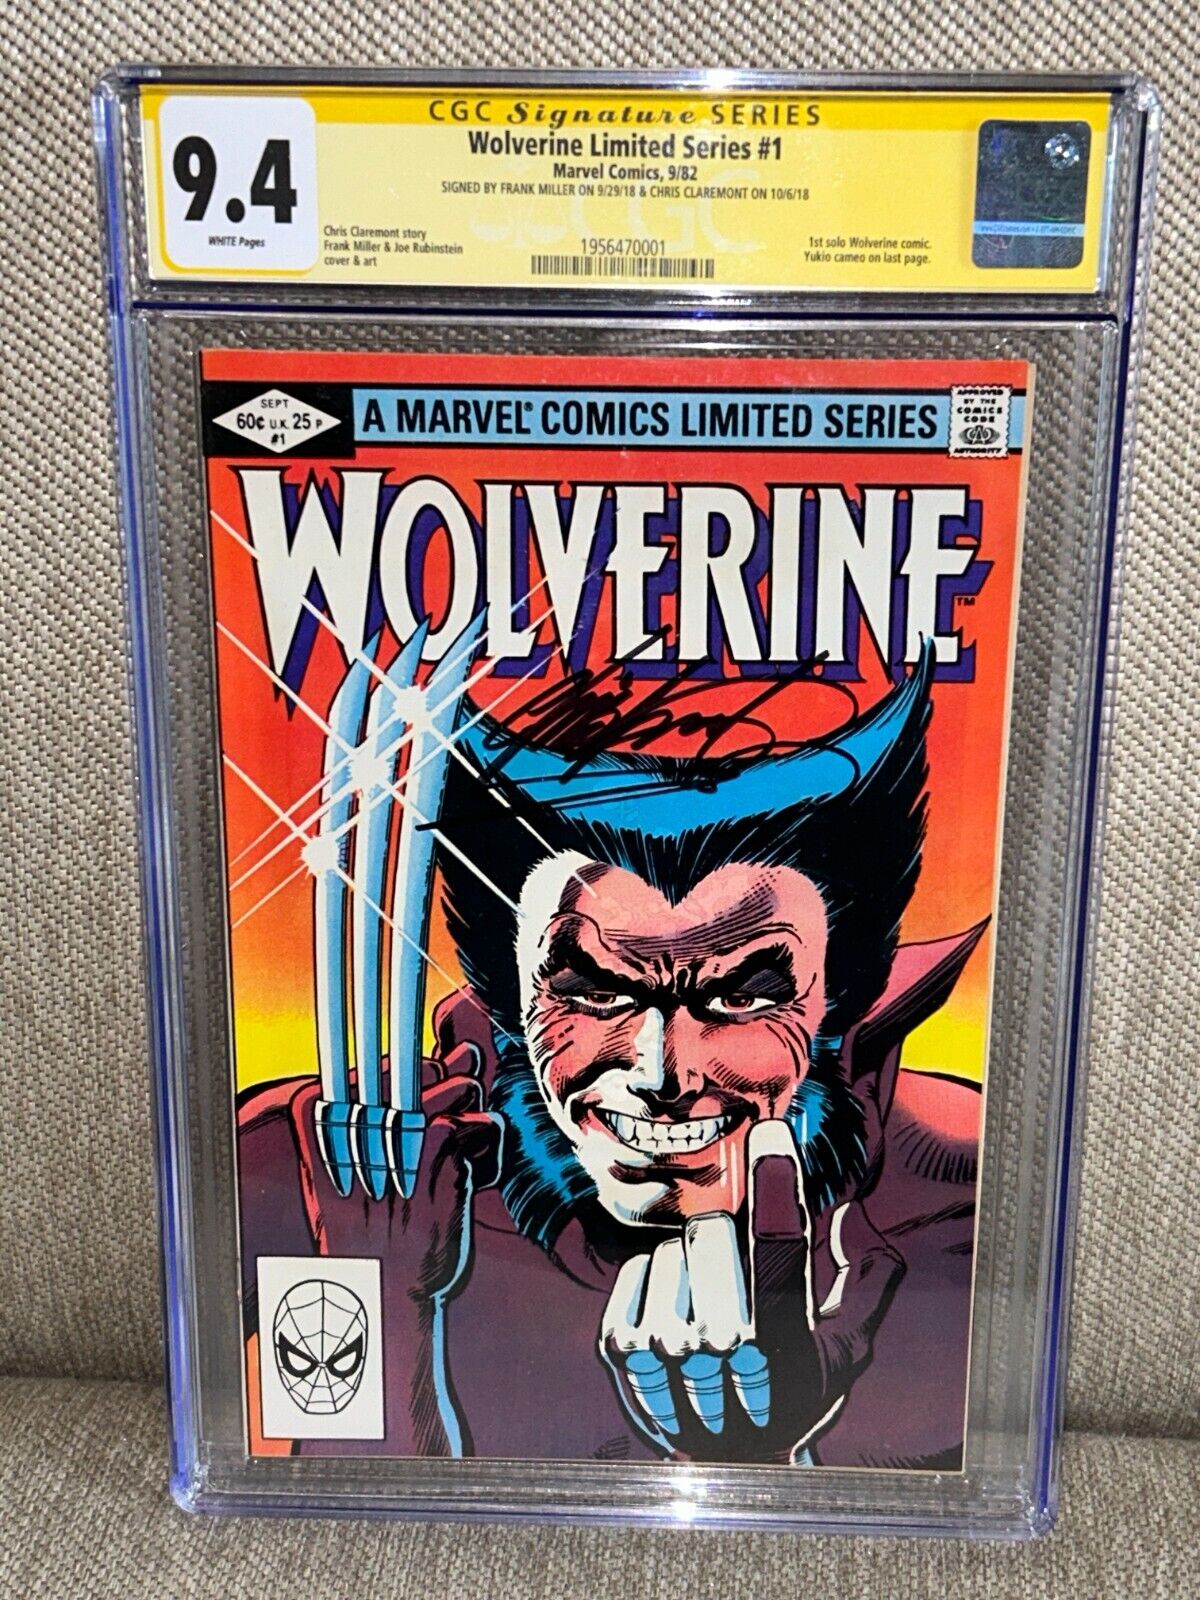 Wolverine Limited Series 1 CGC 9.4 Signature Series Frank Miller & Claremont SS